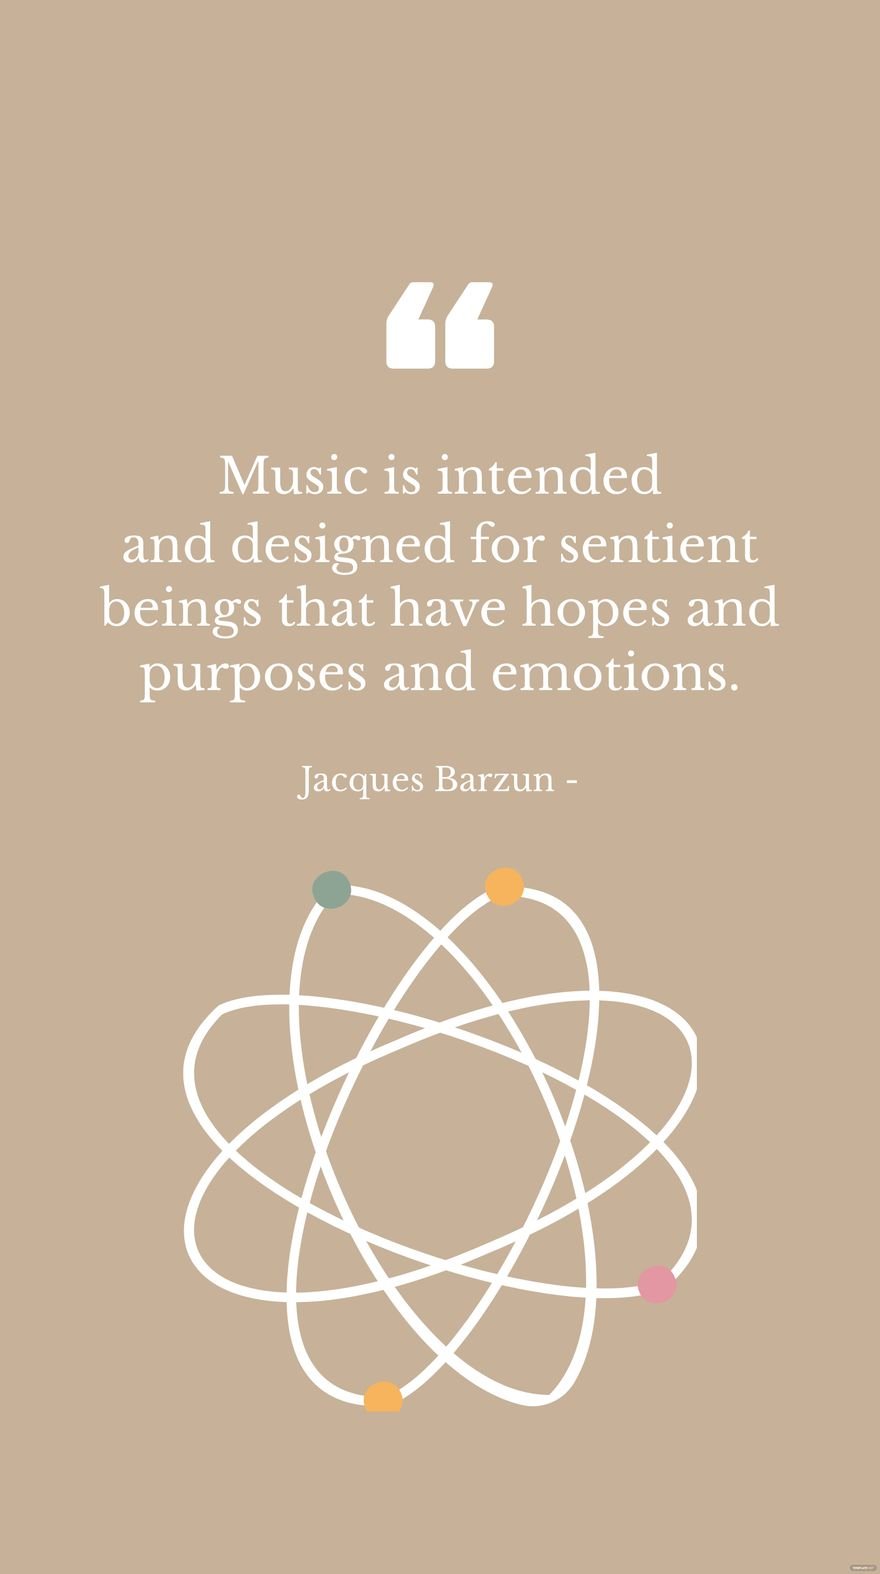 Jacques Barzun - Music is intended and designed for sentient beings that have hopes and purposes and emotions.